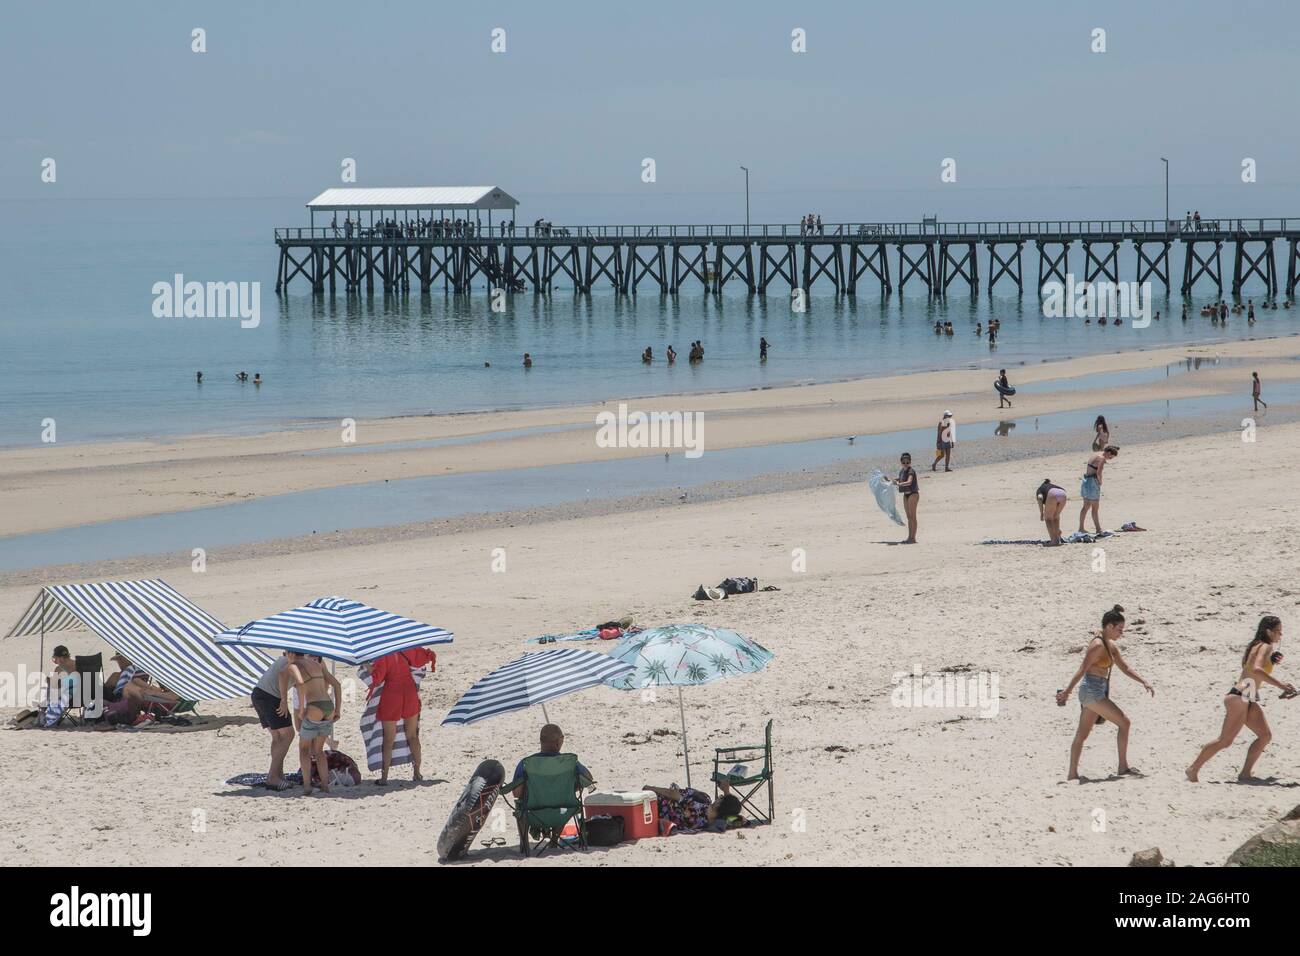 Adelaide, Australia. 18 December 2019.Beachgoers in the coastal suburb of Glenelg Adelaide during extreme  hot weather  with record temperatures for December. A  Code Red alert has been issued for Adelaide and across South Australia ahead of a heatwave which is expected to deliver extreme temperatures exeeding 40Celsius over the next coming days. Credit: Amer Ghazzal/Alamy Live News Stock Photo